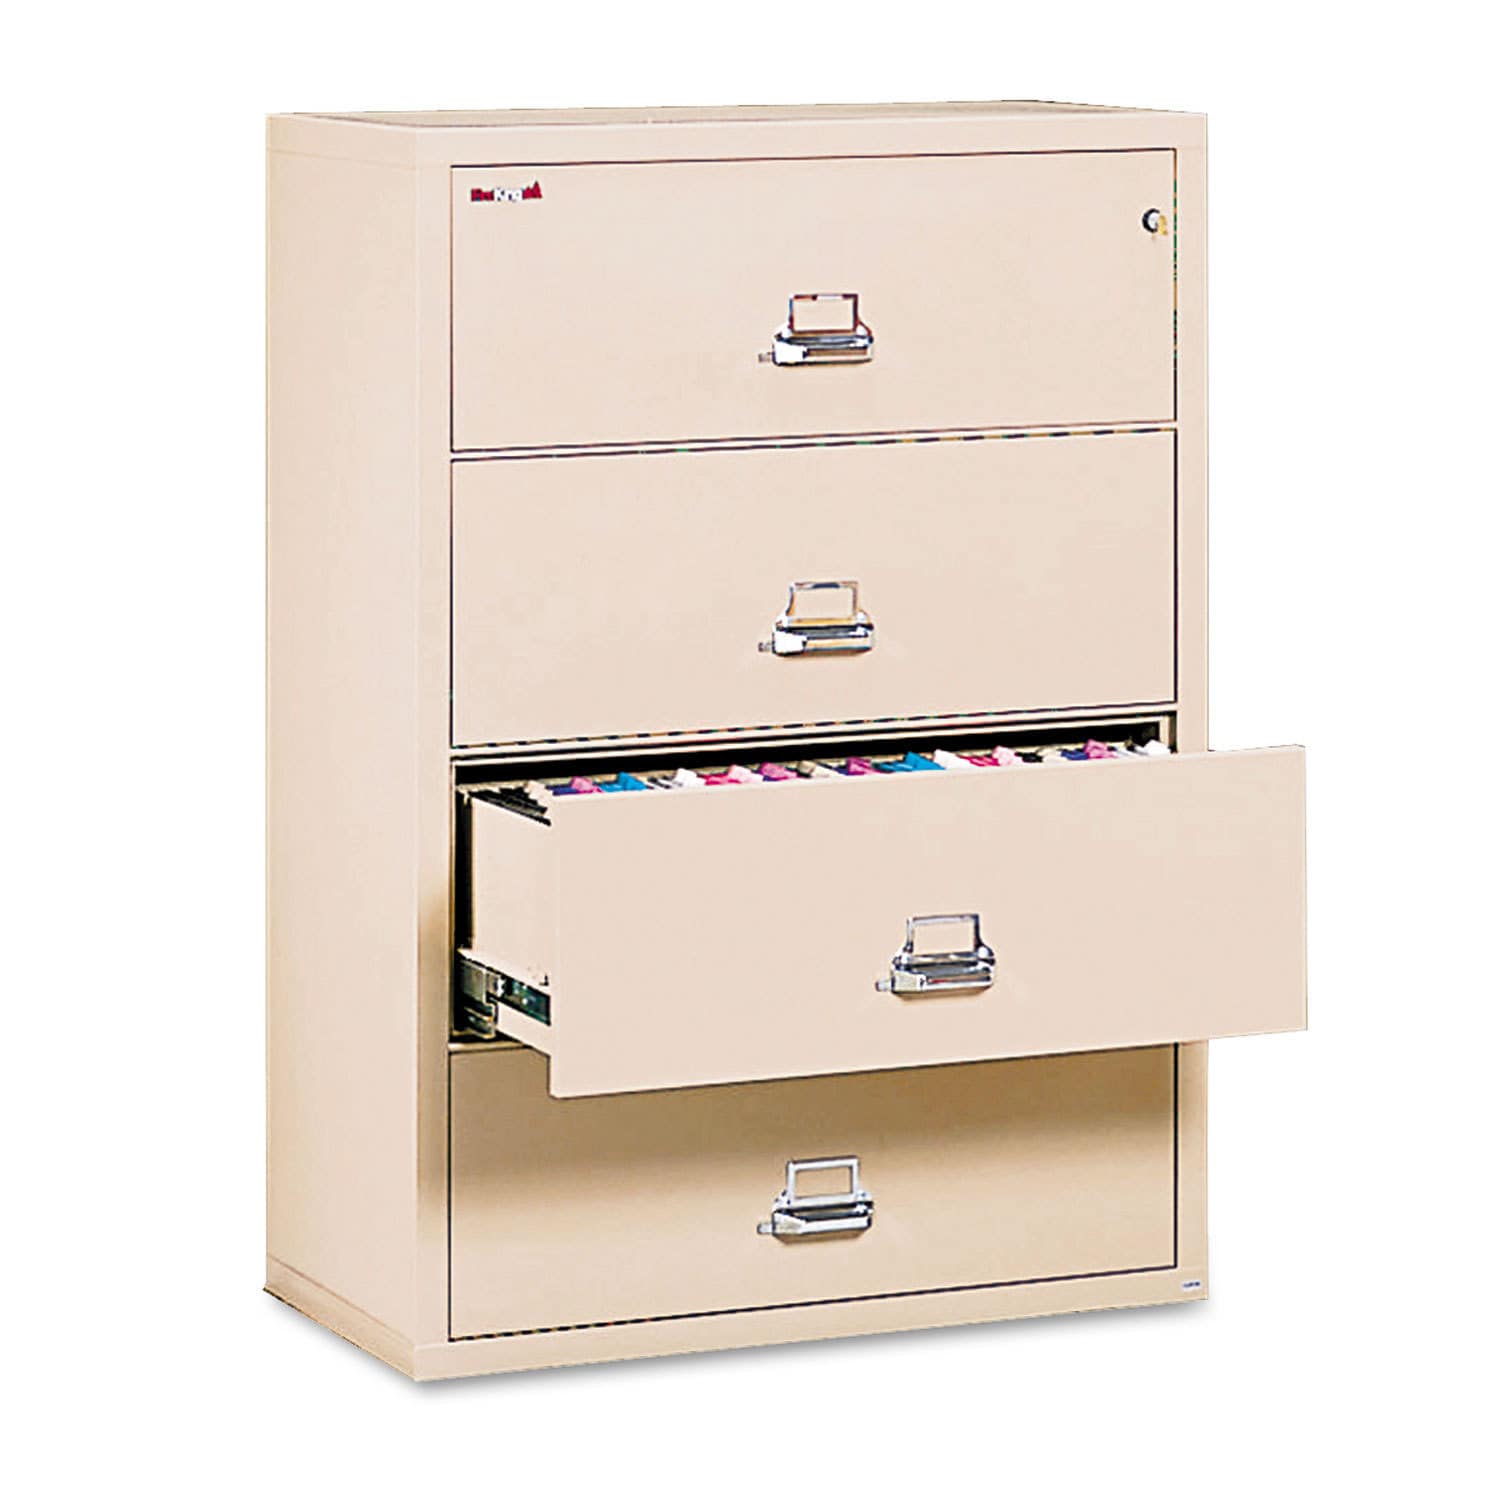 Shop Fireking Four Drawer Lateral File Cabinet 37 1 2w X 22 1 8d